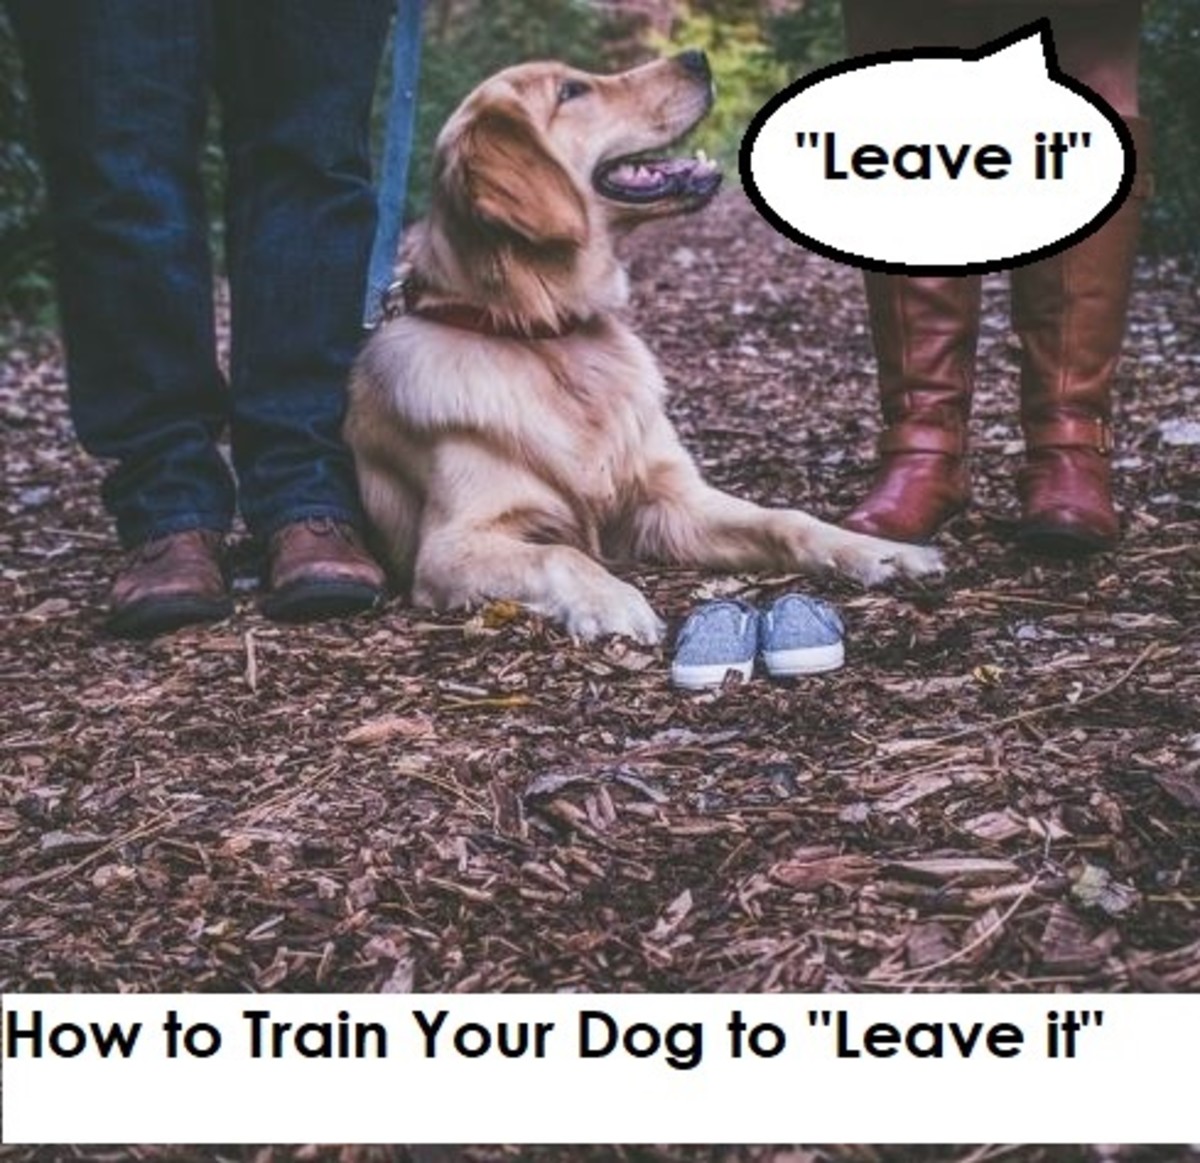 Training your dog in this skill can be important for both convenience and their safety.